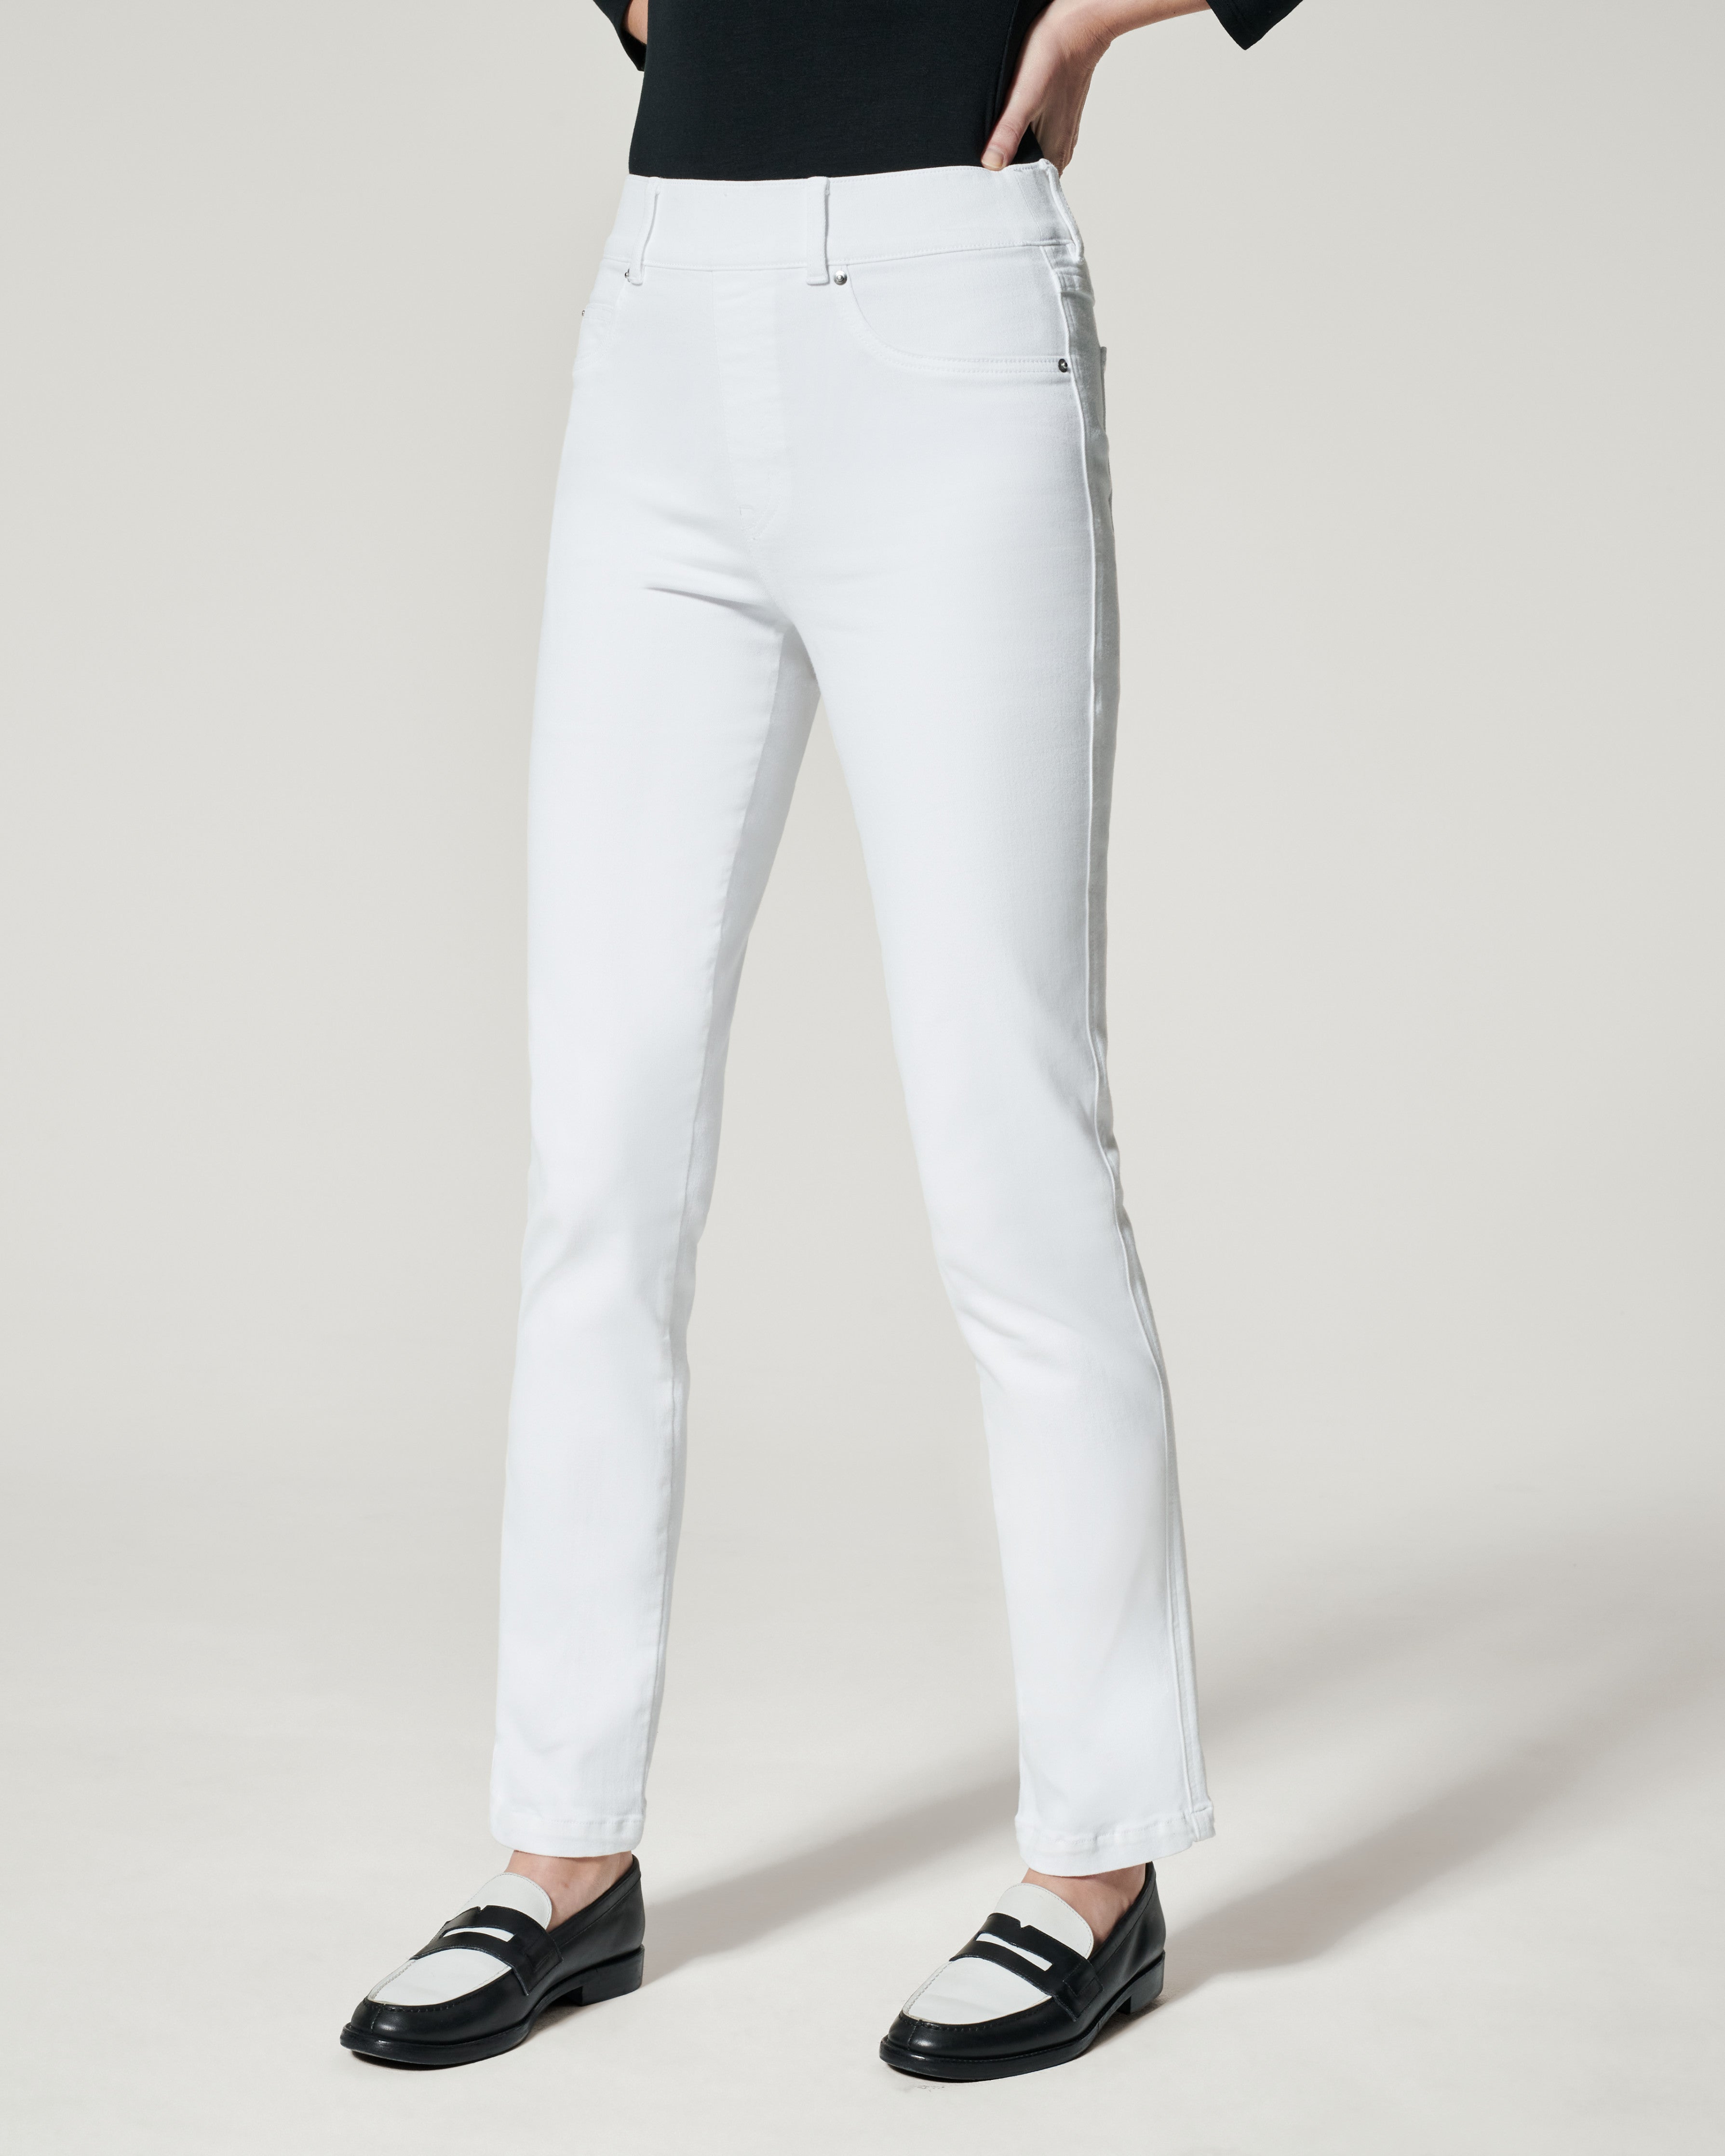 SPANX - Straight Leg Jeans that will be your jean come true: made